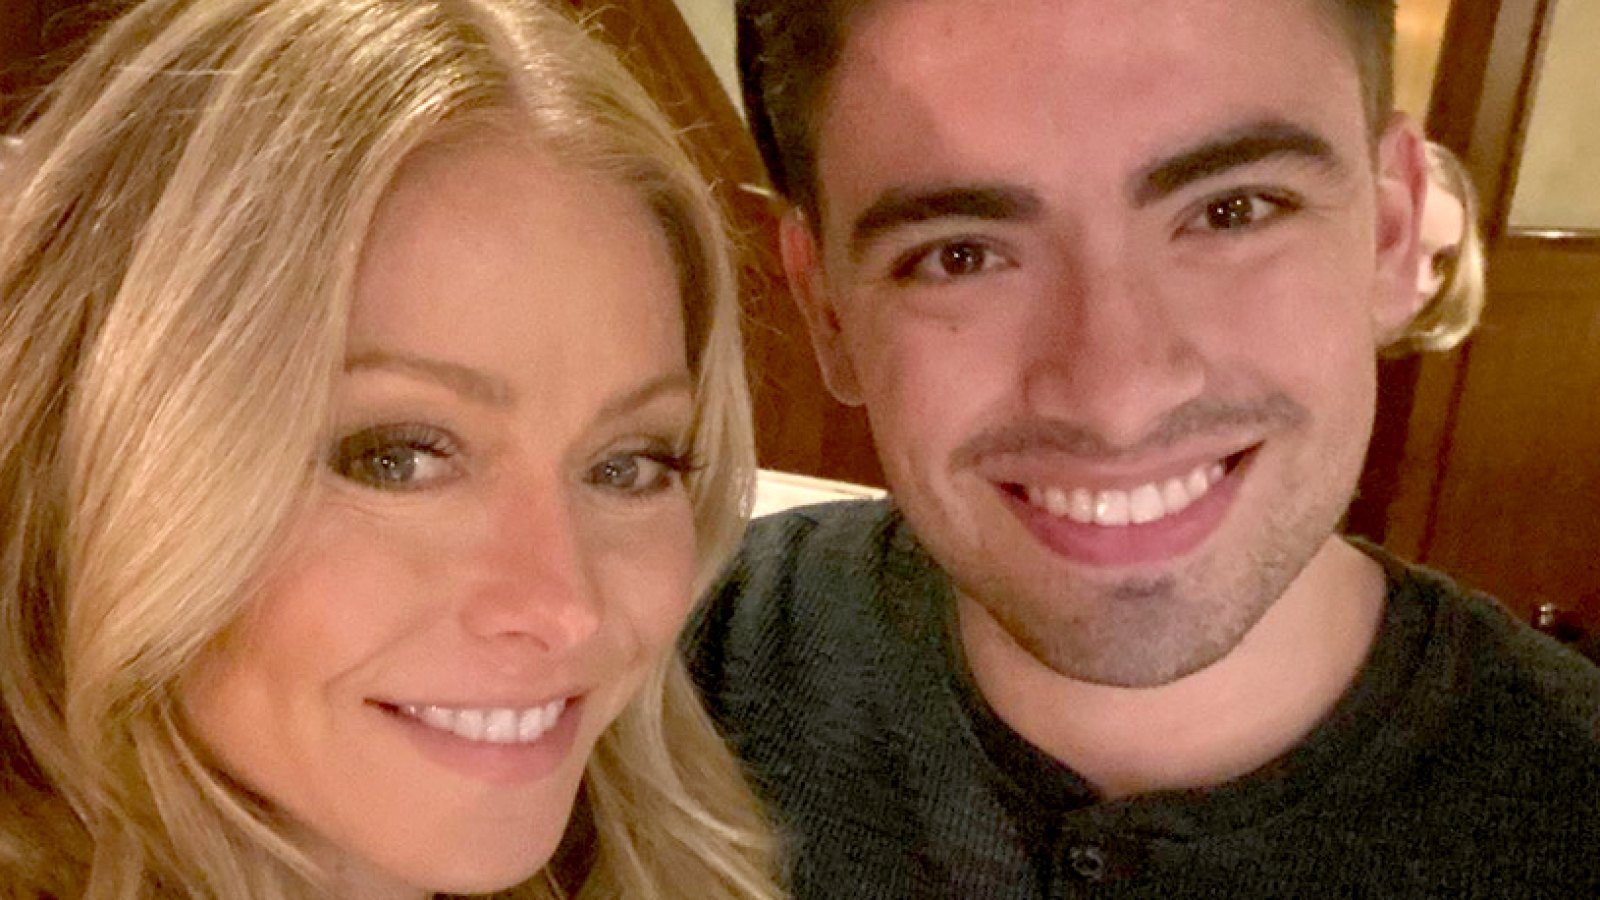 Kelly-Ripa-and-Son-Michael-Collaborate-on-Film-School-Project